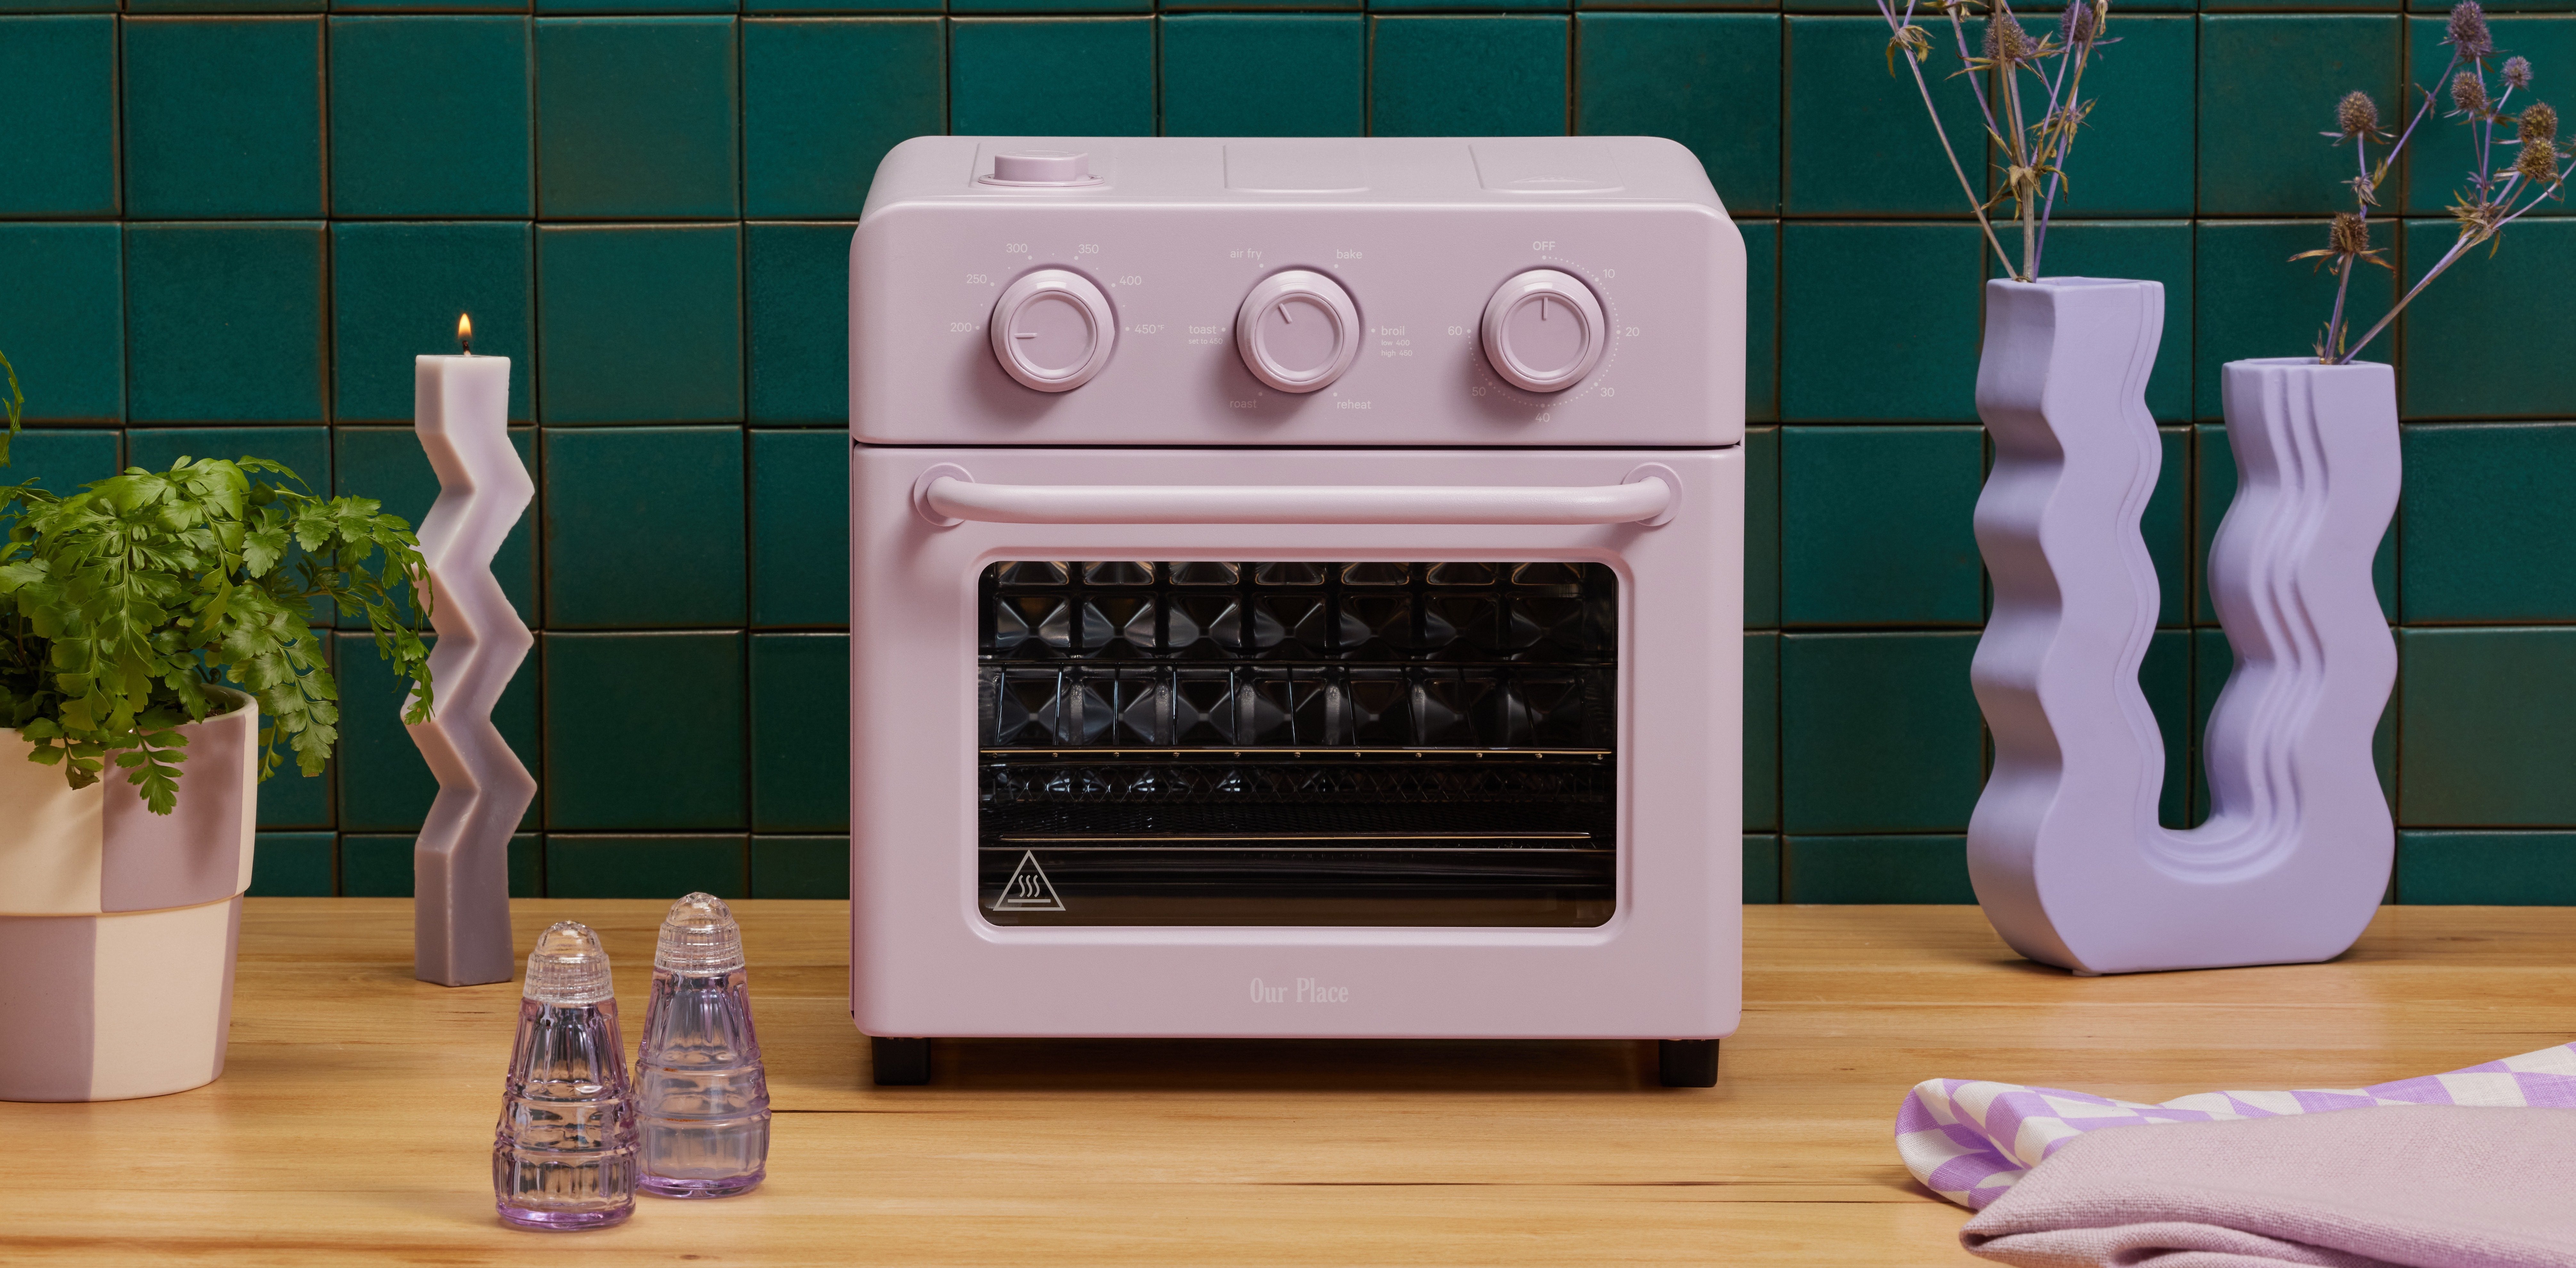 Our Place Wonder Oven 6-in-1 Air Fryer & Toaster in Spice